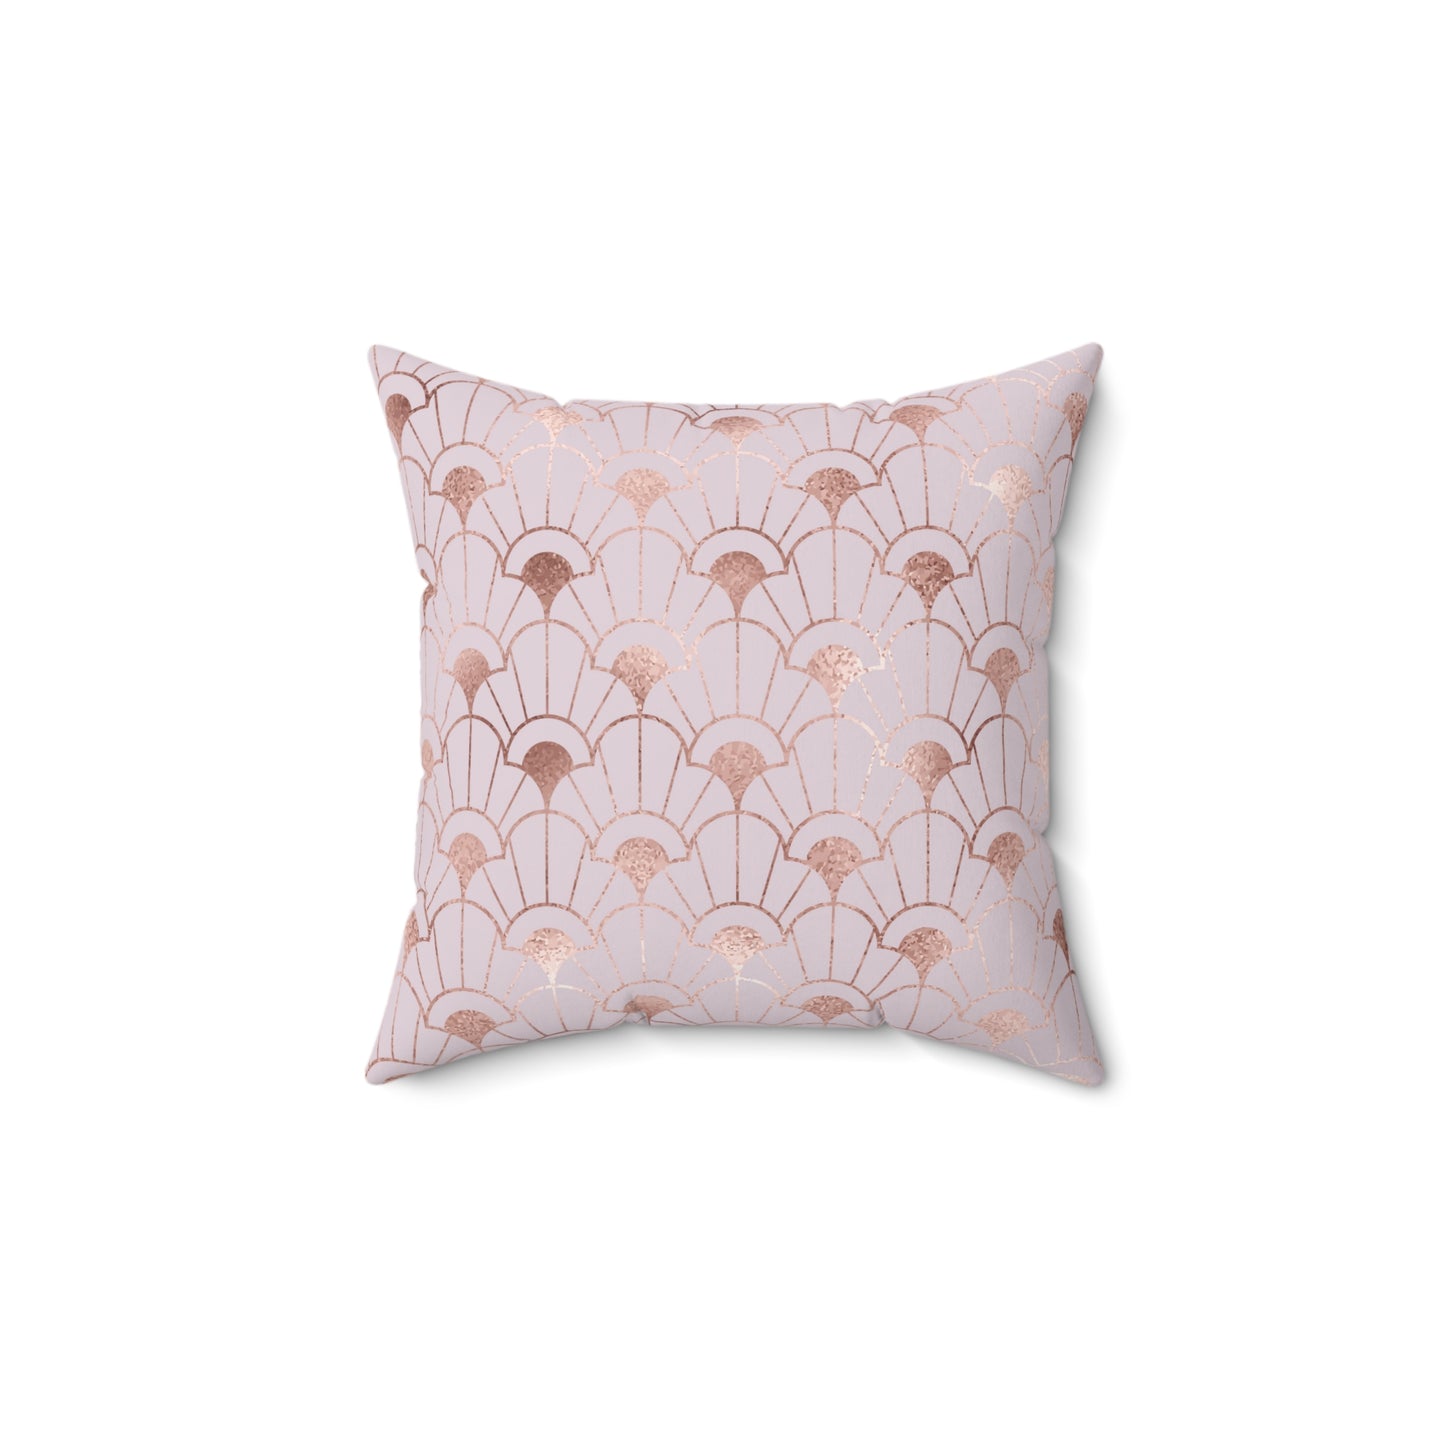 Rose Gold Art Deco Flowers Spun Polyester Square Pillow with Insert